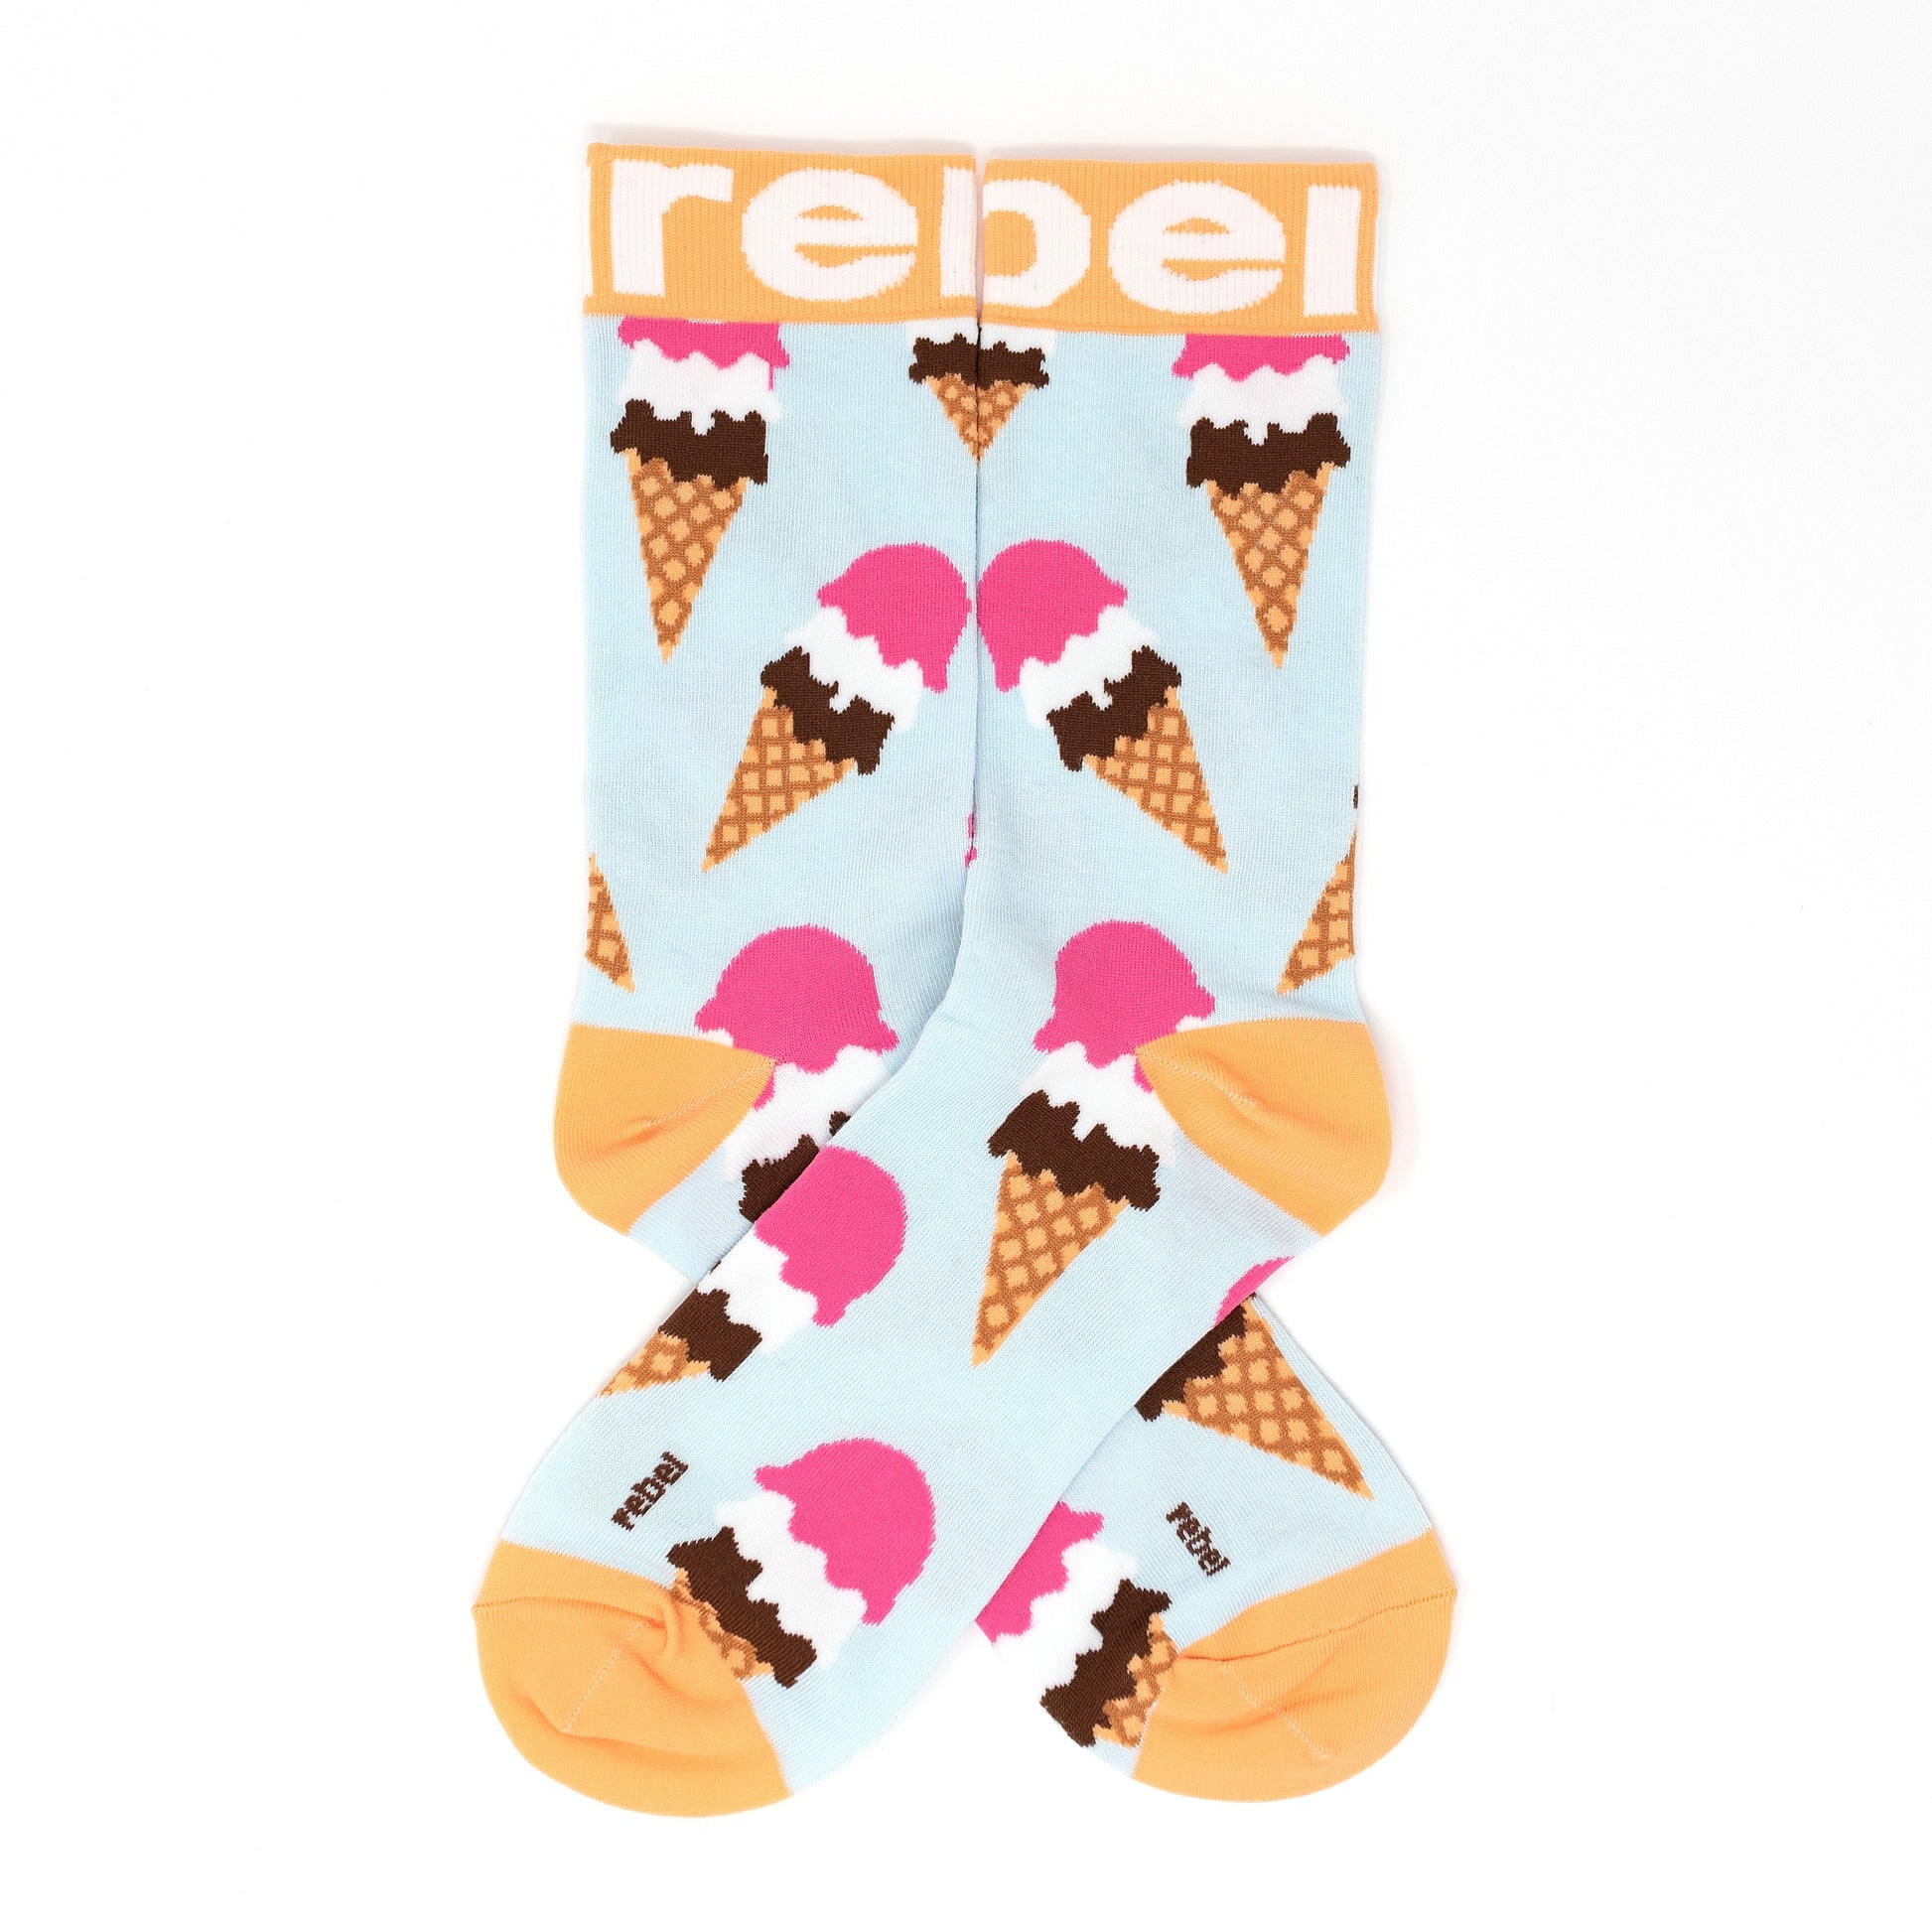 Crafted from a high-quality blend of cotton, nylon, and spandex, our funky socks are not only stylish but also comfortable and durable.